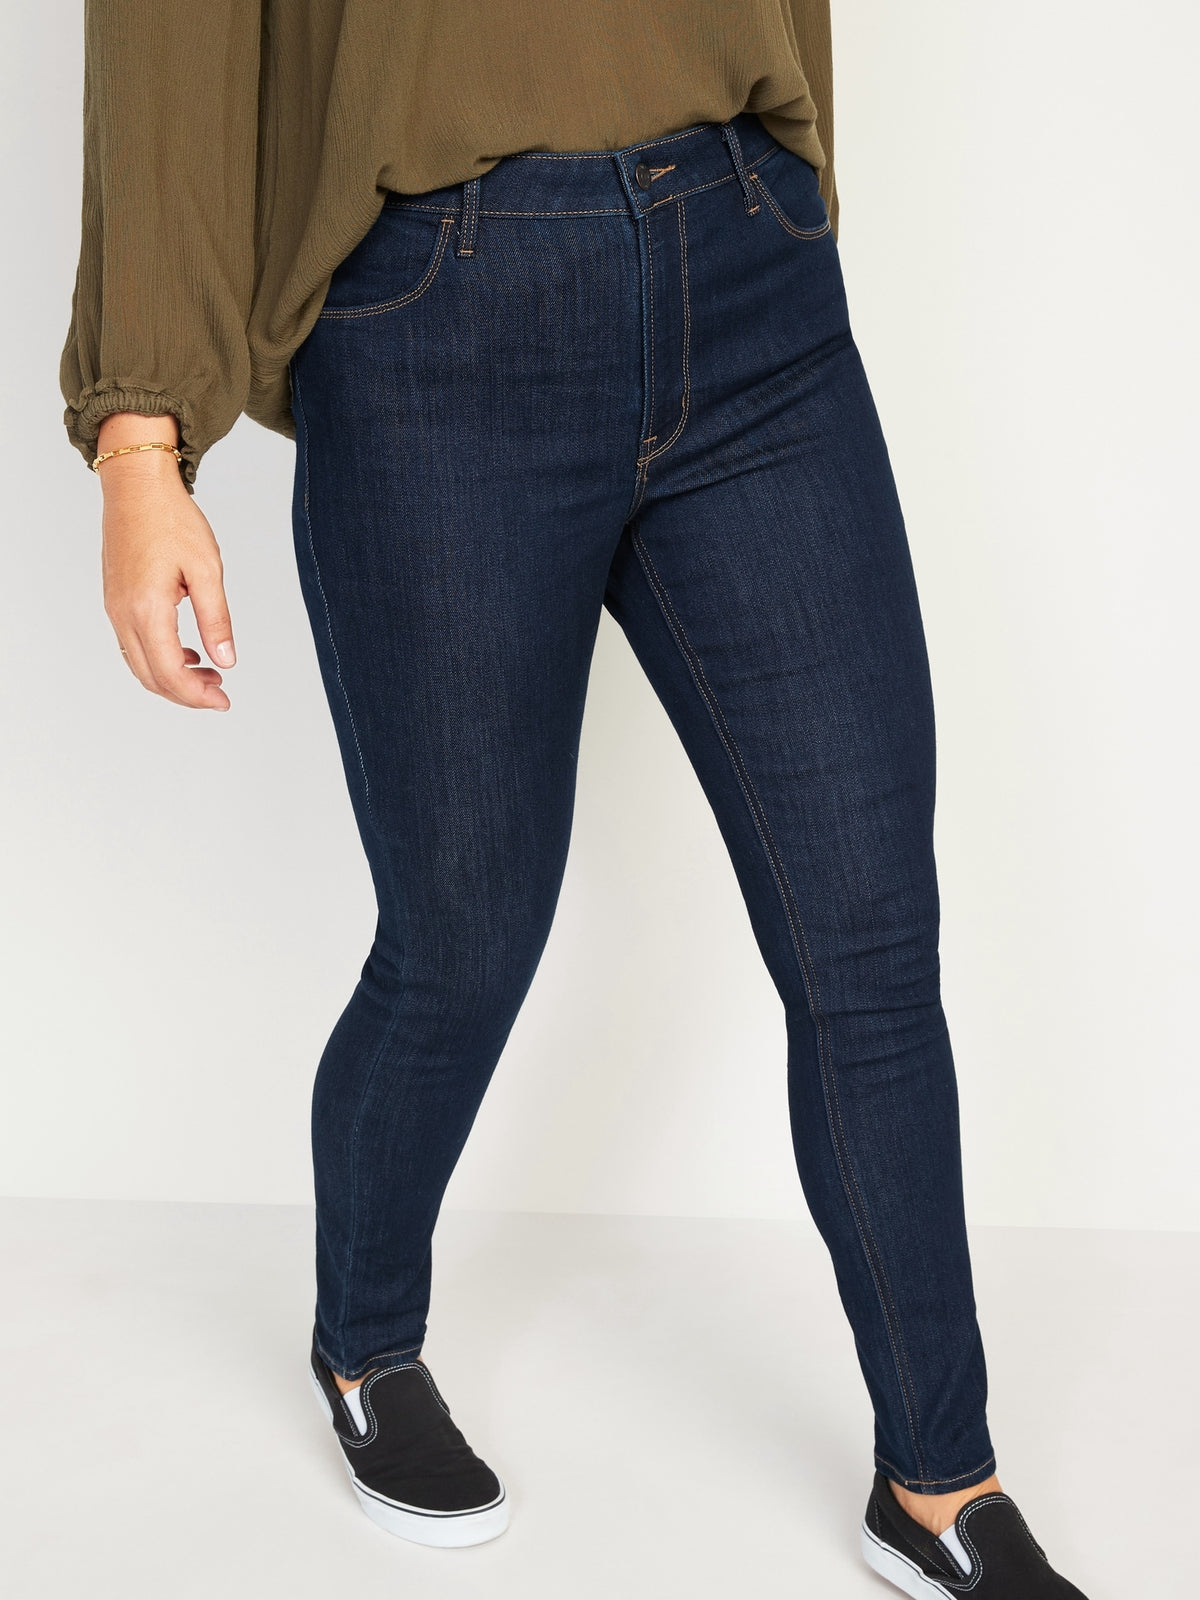 High-Waisted Dark-Wash Super Skinny Jeans for Women - Old Navy Philippines